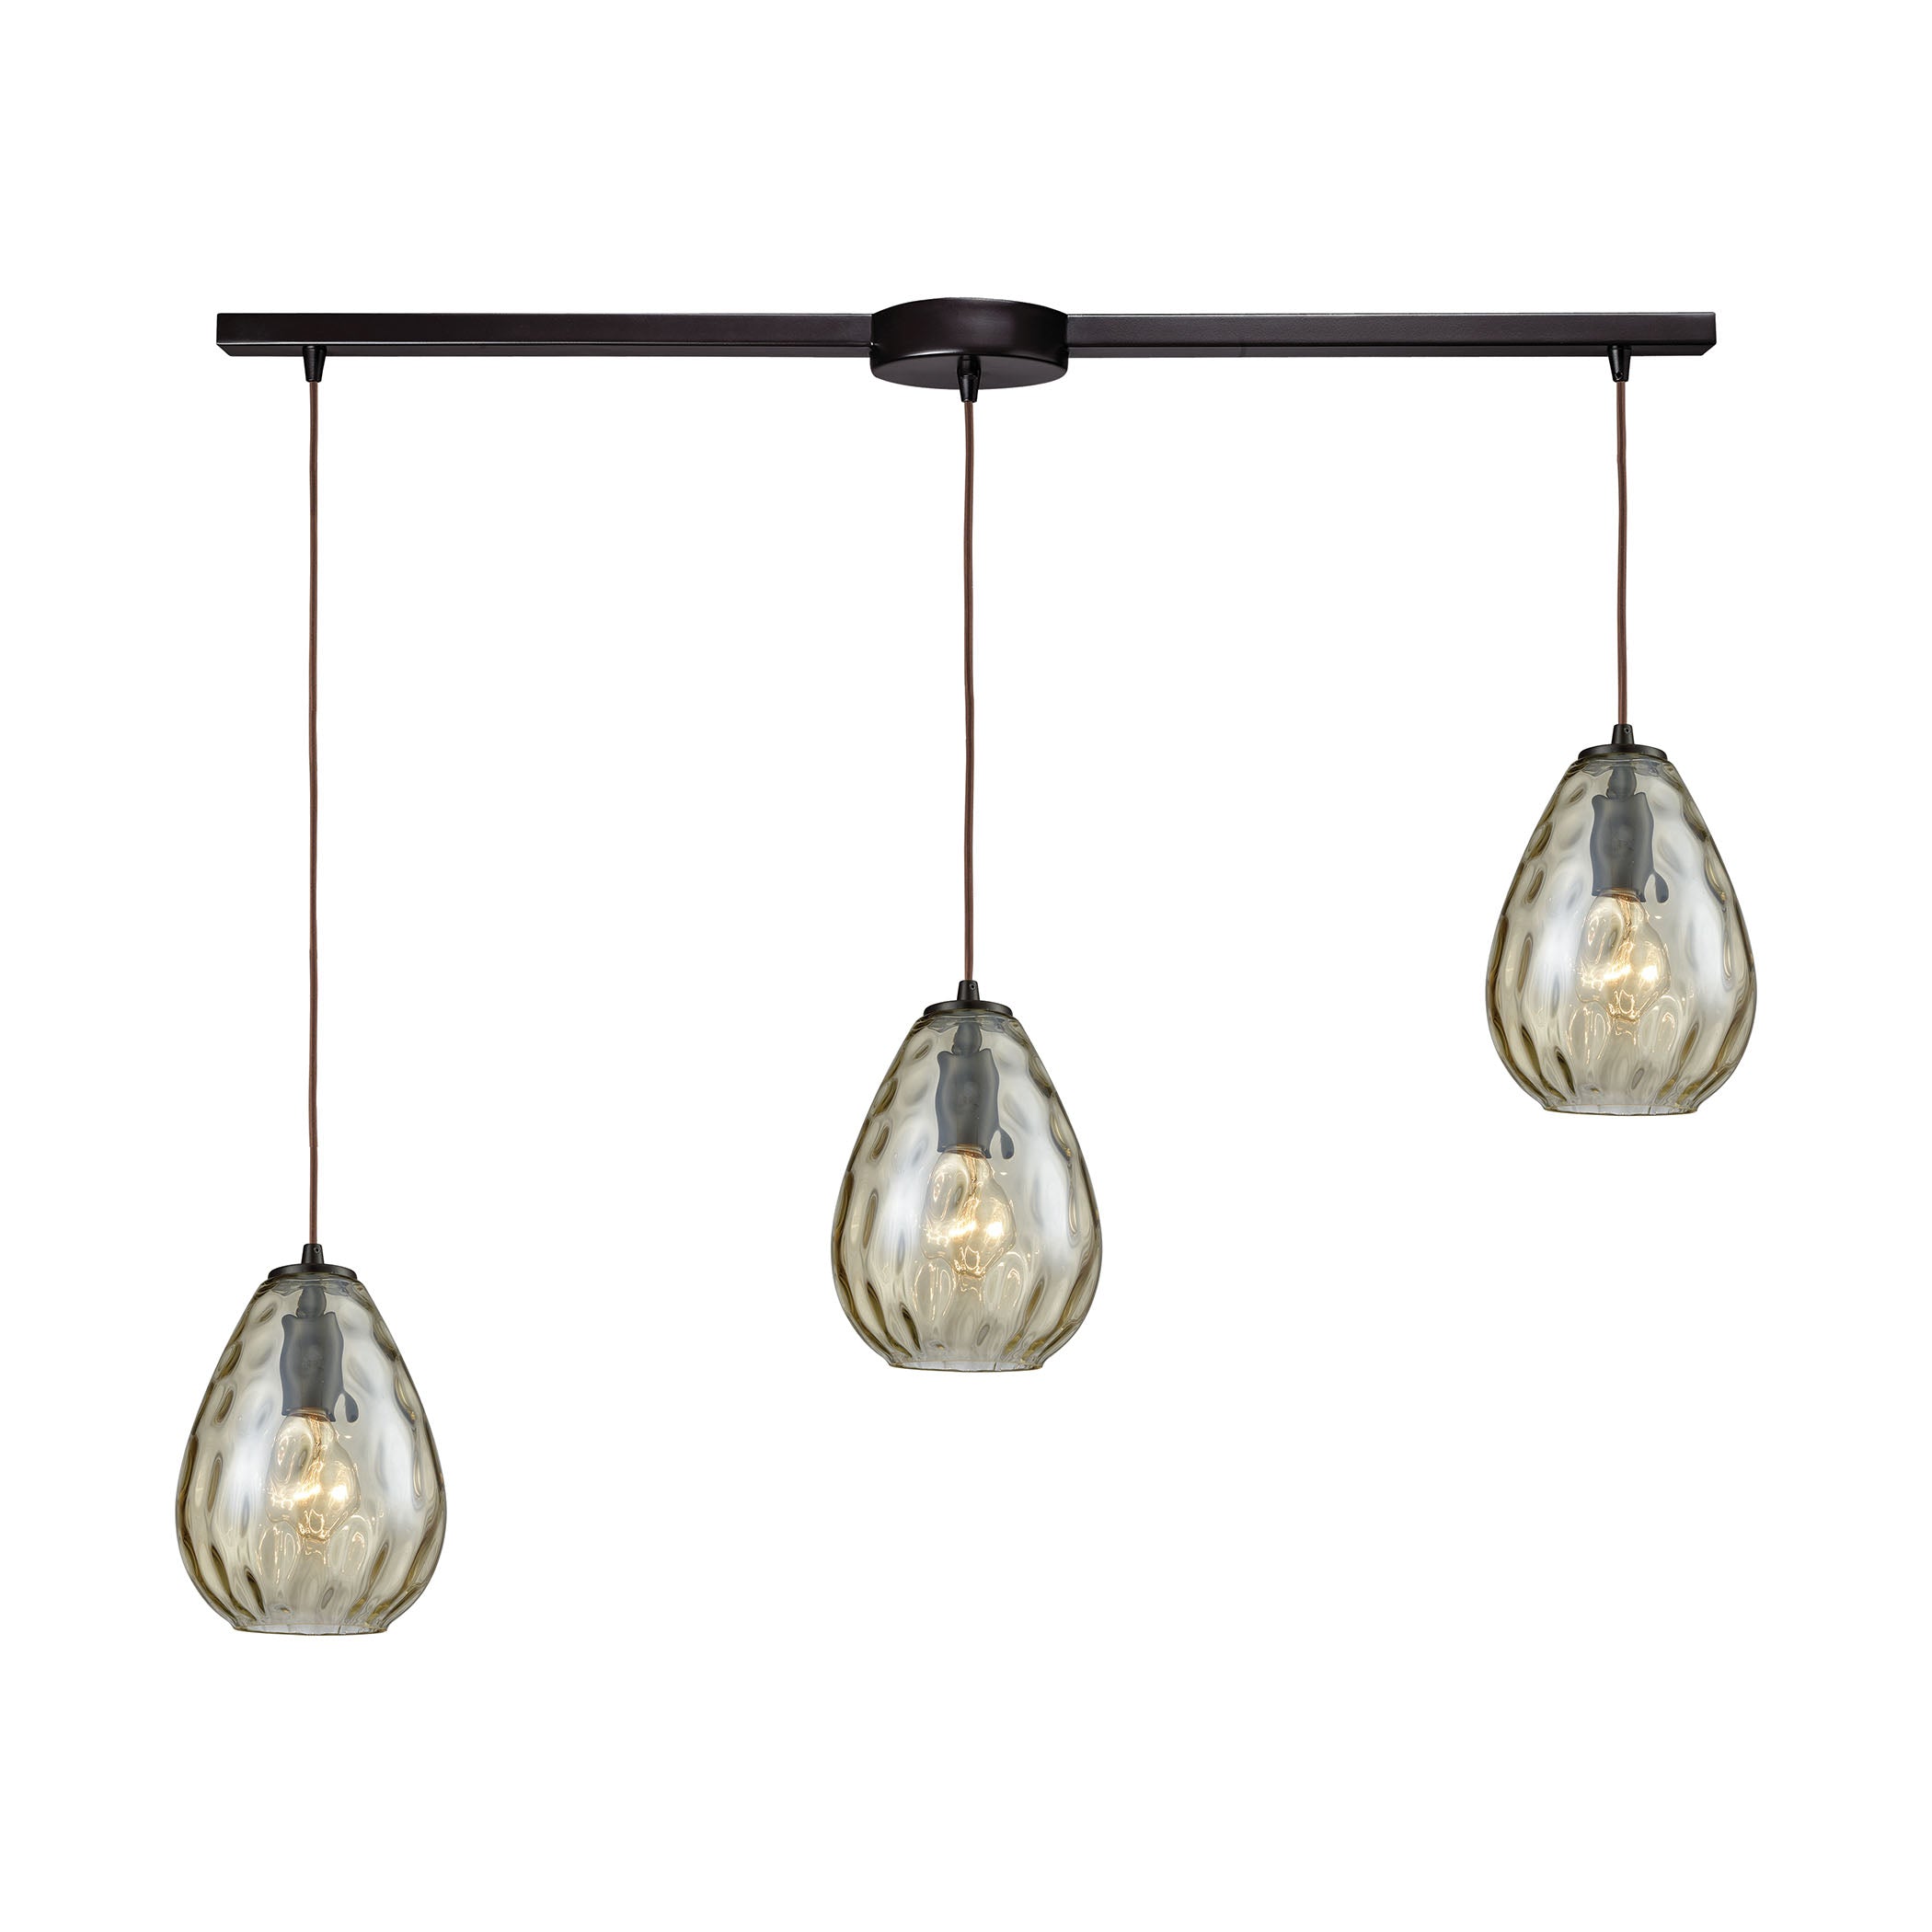 ELK Lighting 10780/3L Lagoon 3-Light Linear Mini Pendant Fixture in Oil Rubbed Bronze with Champagne-plated Water Glass